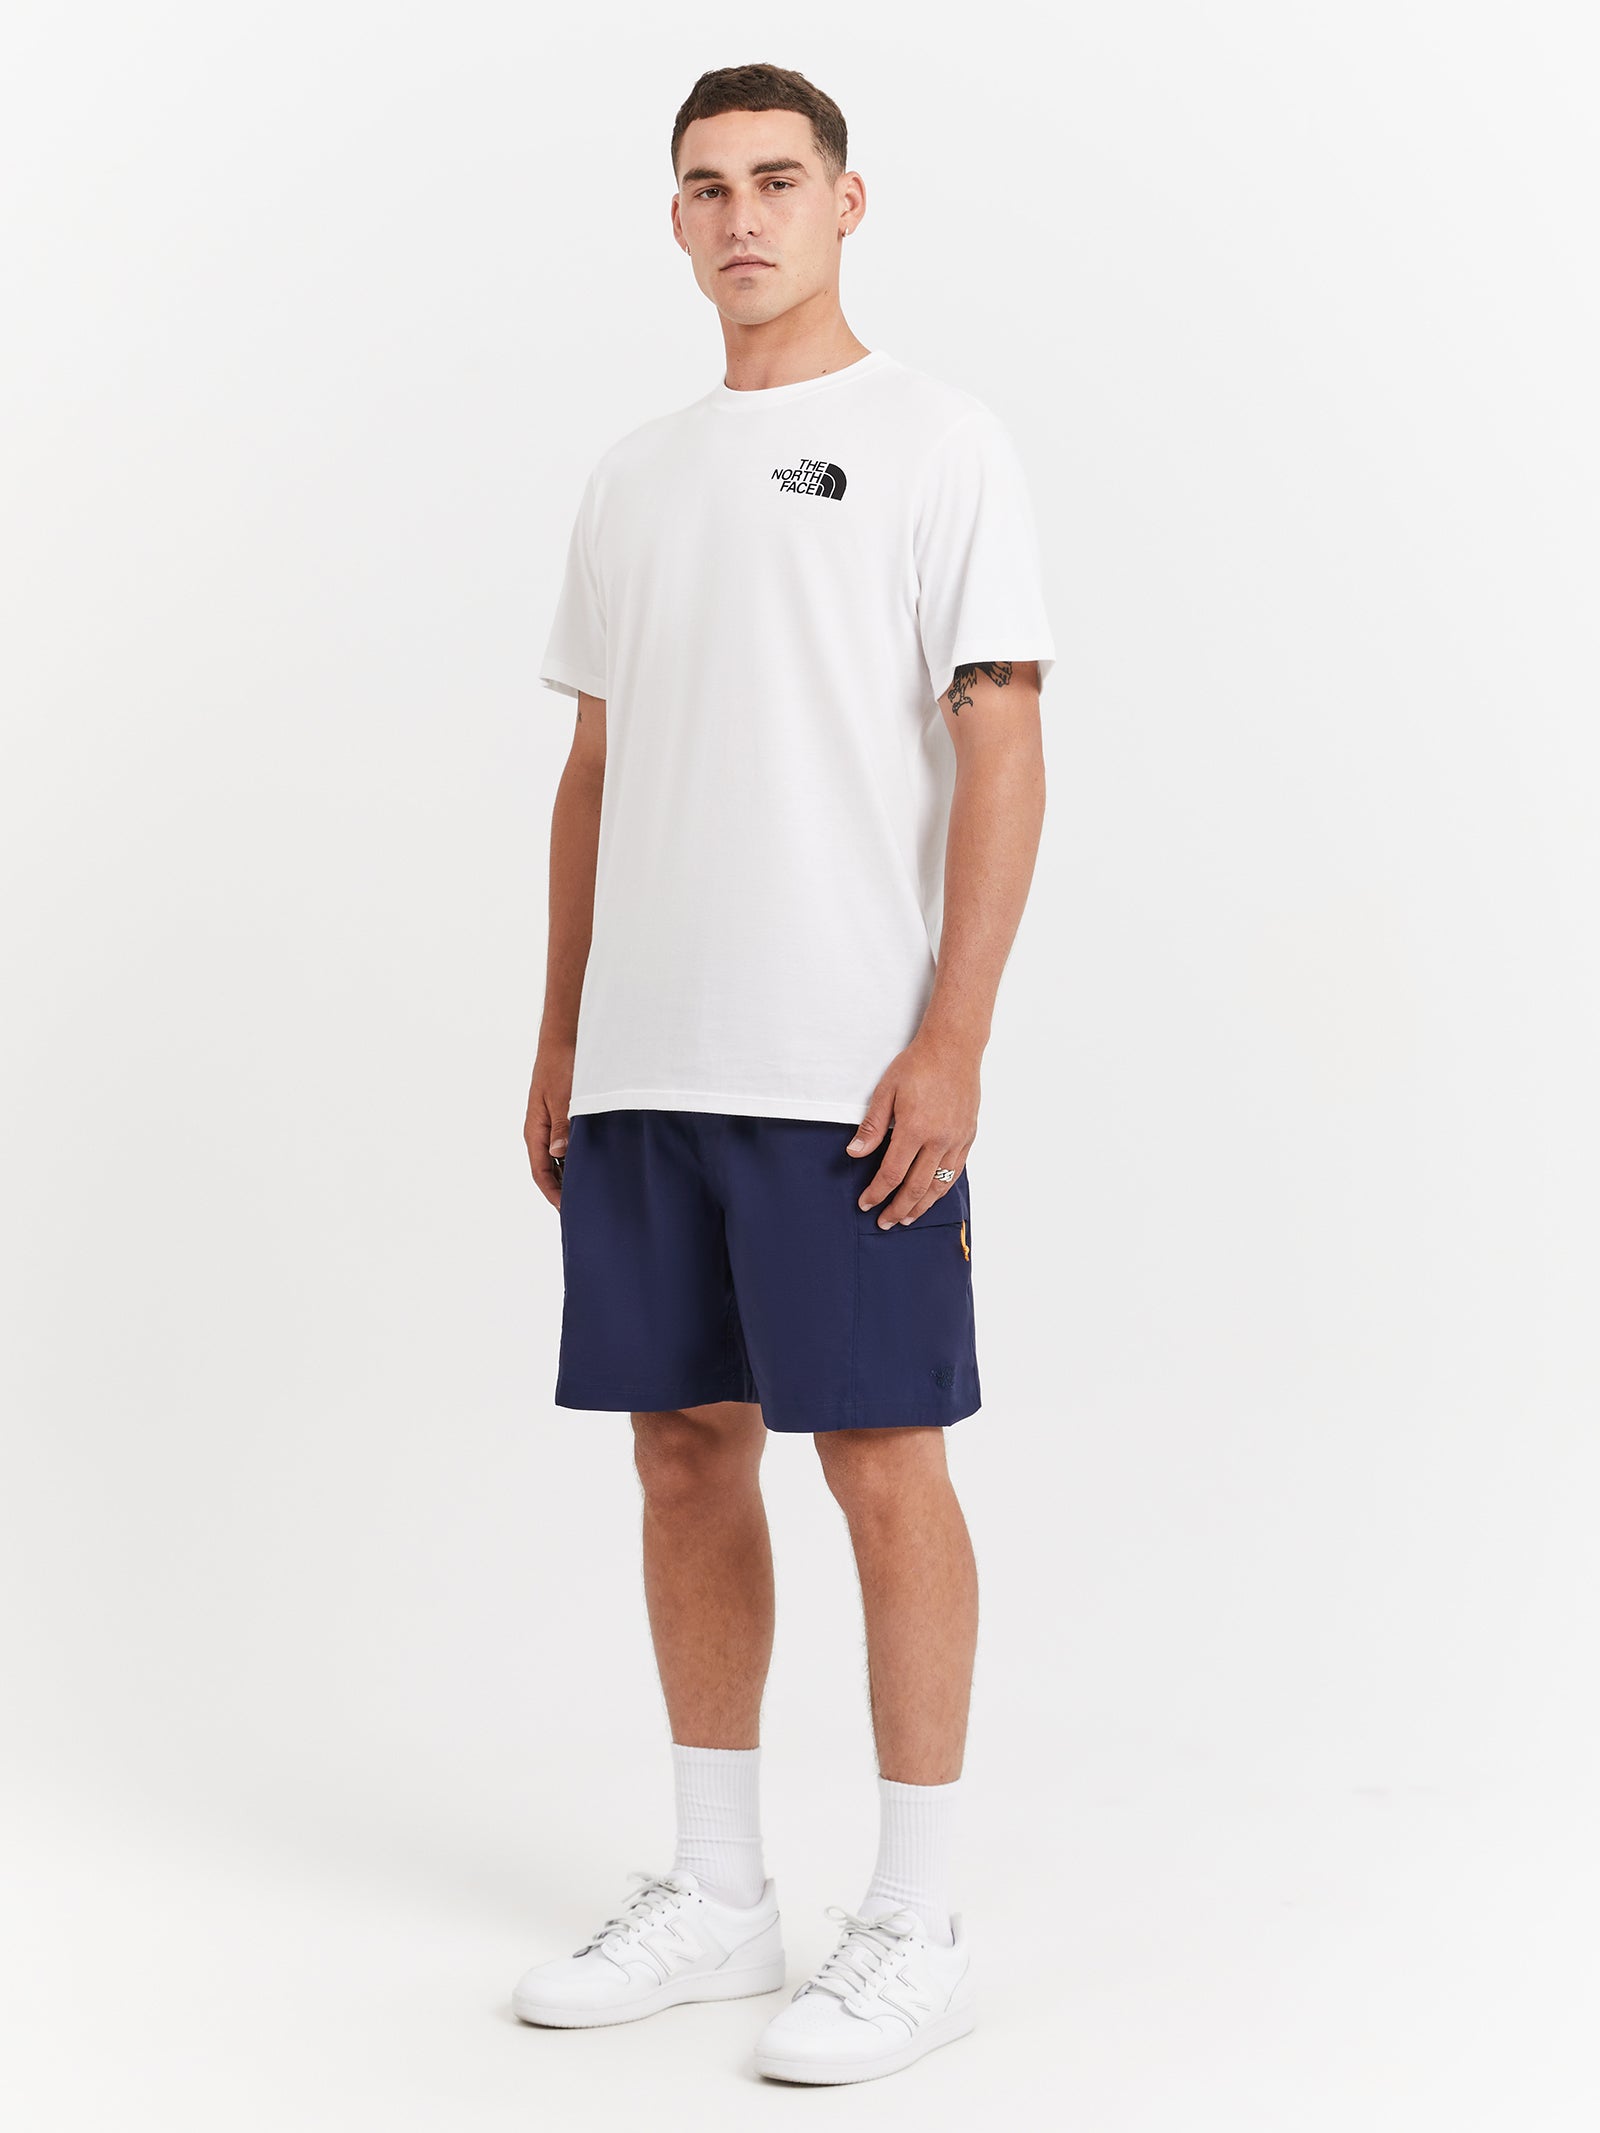 Class V Belted Shorts in Summit Navy